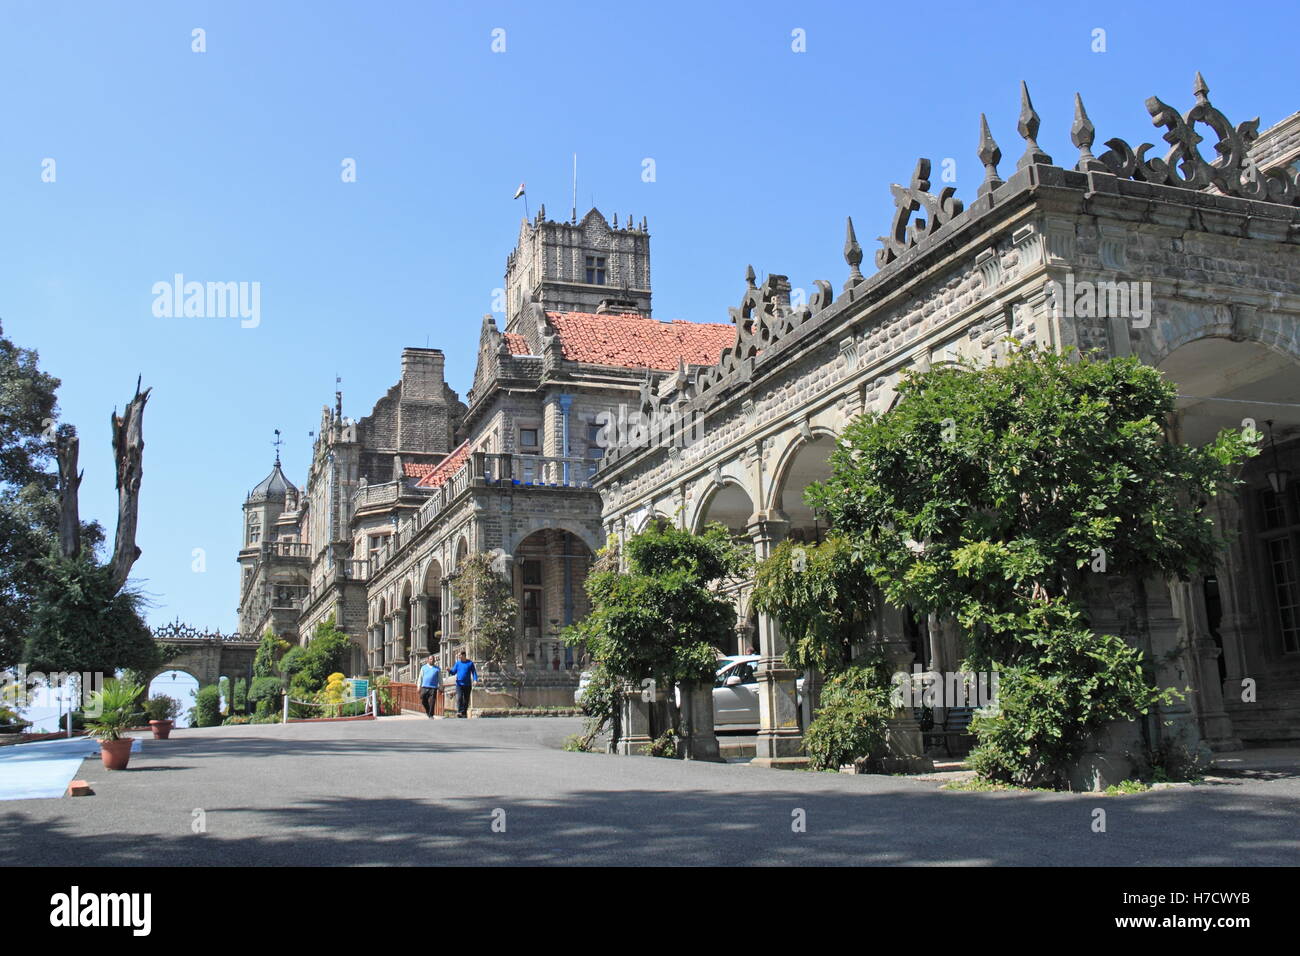 Institute of Advanced Studies (formerly Viceregal Lodge), Shimla, Himachal Pradesh, India, Indian subcontinent, South Asia Stock Photo